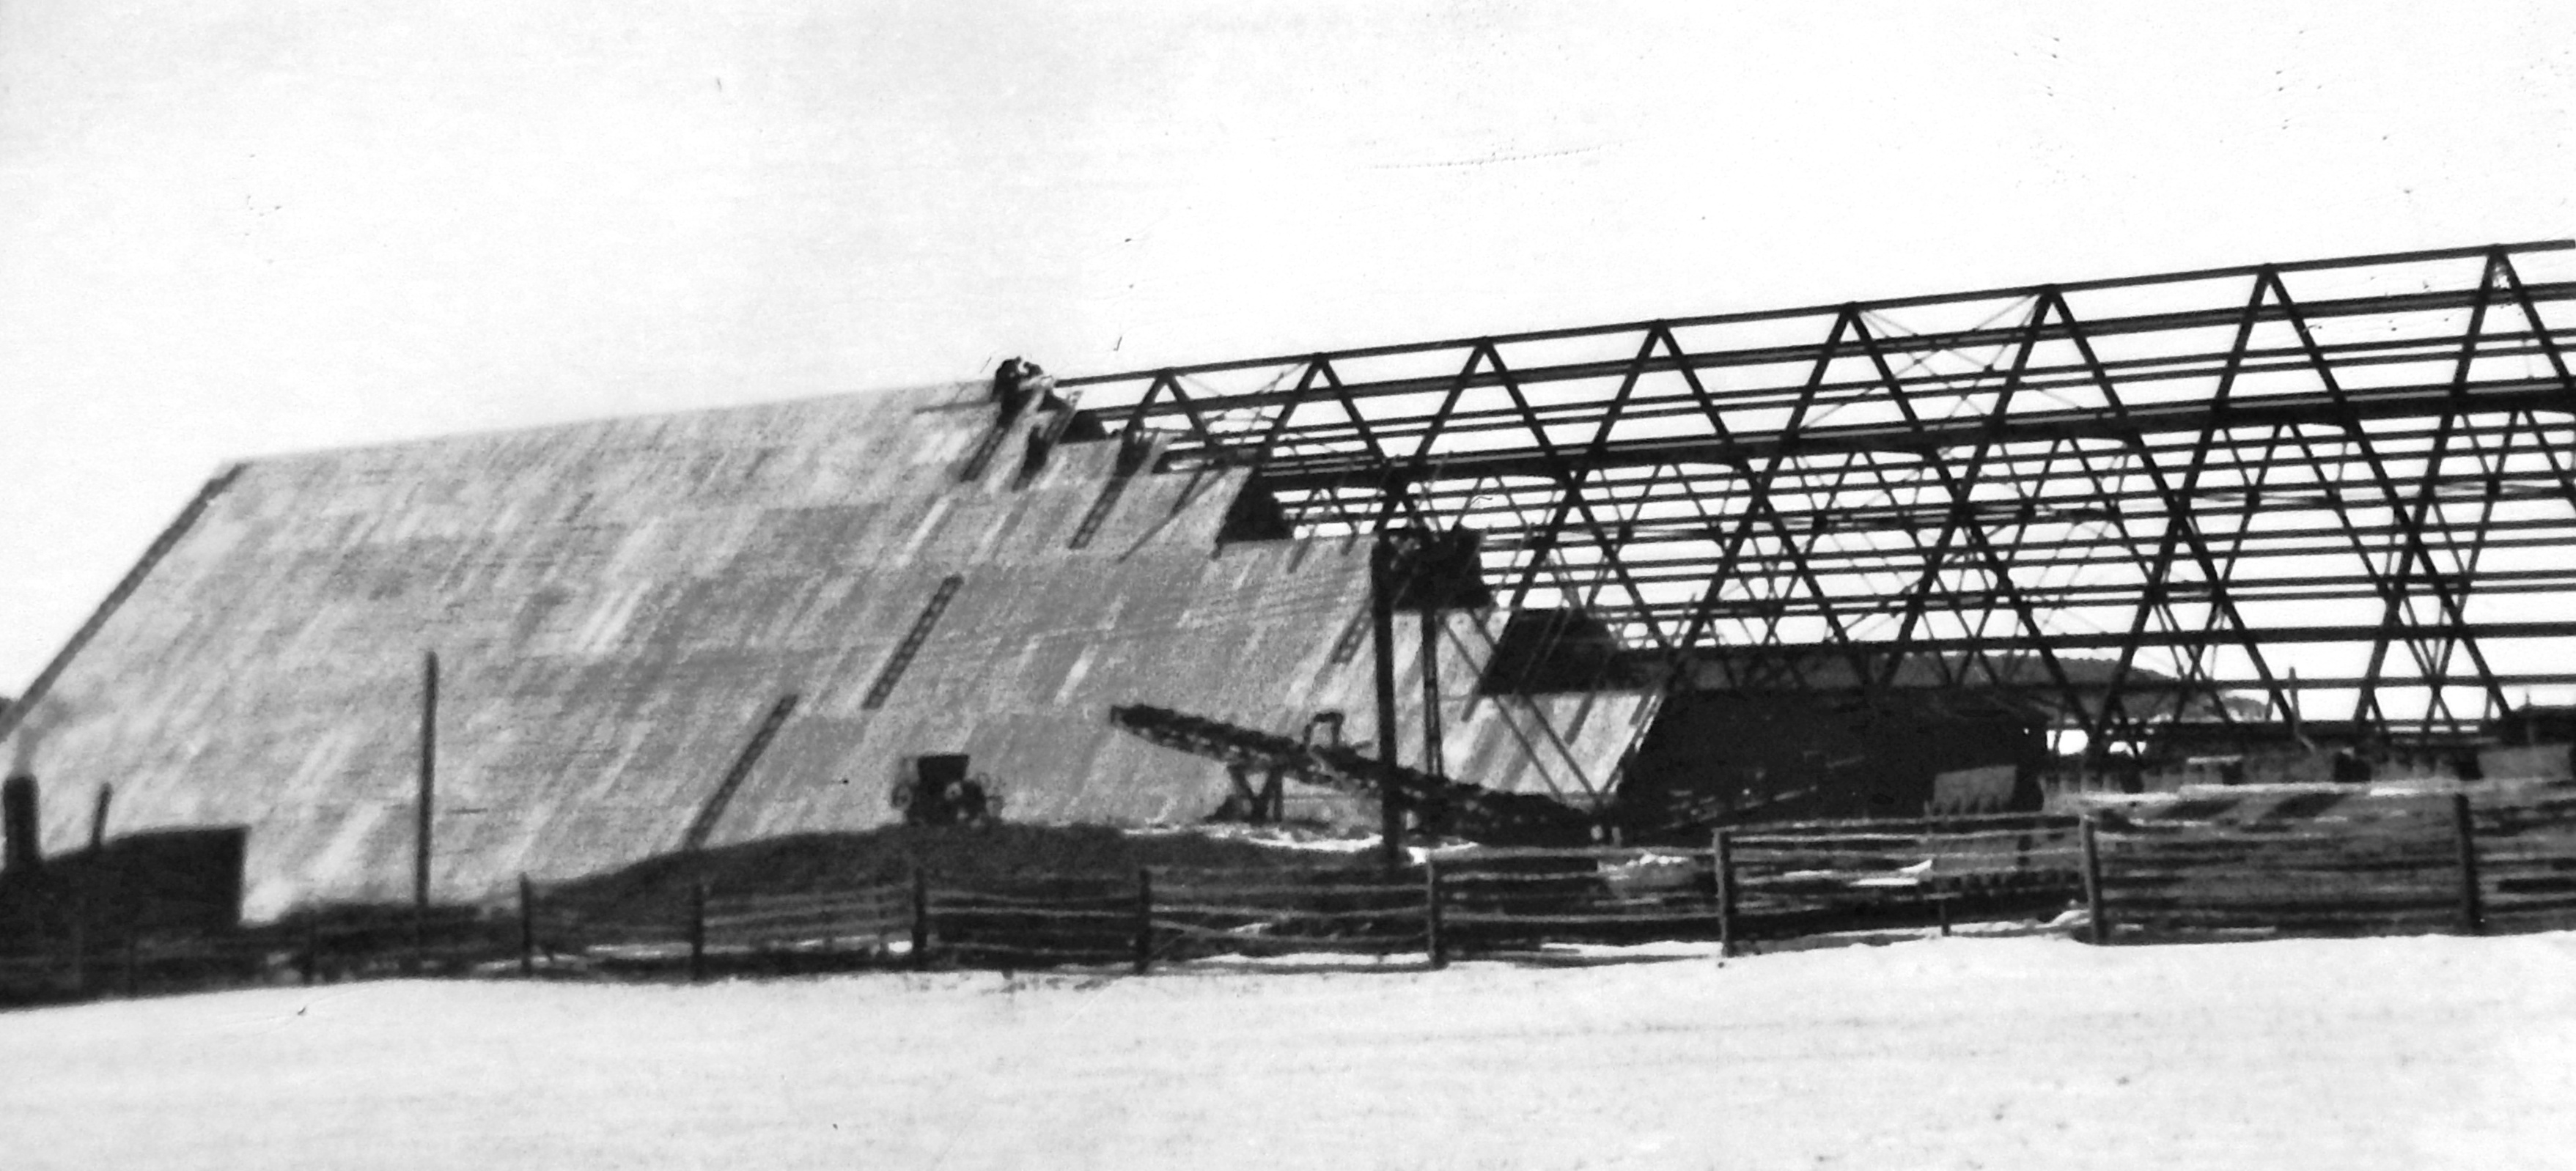 Marker detail: Construction of gypsum storage building for Atlantic Gypsum in February 1929